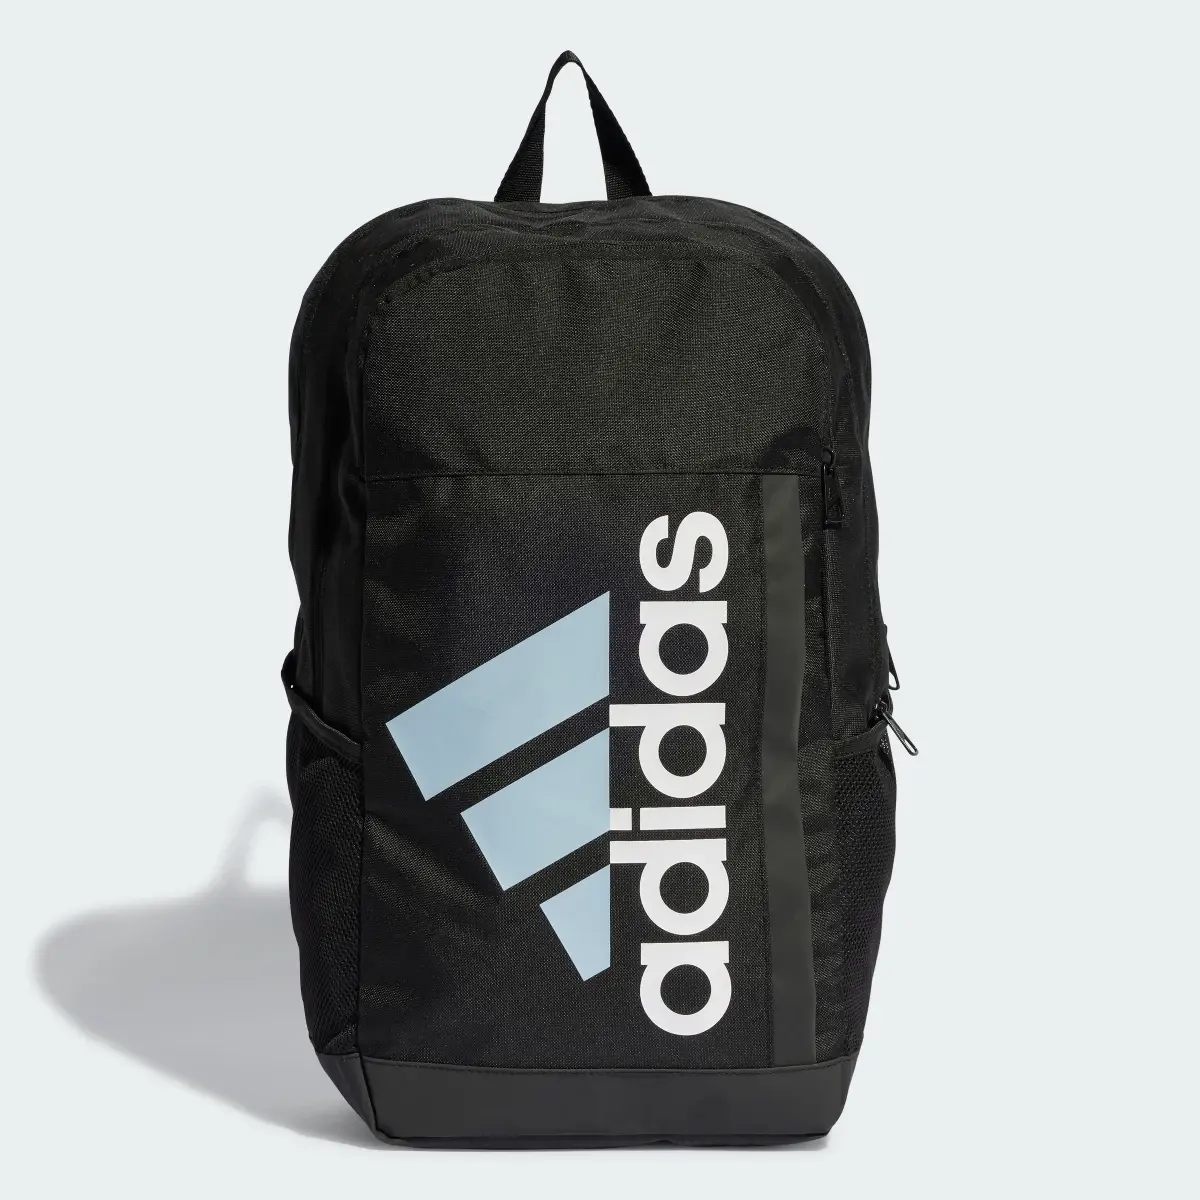 Adidas Motion SPW Graphic Backpack. 2